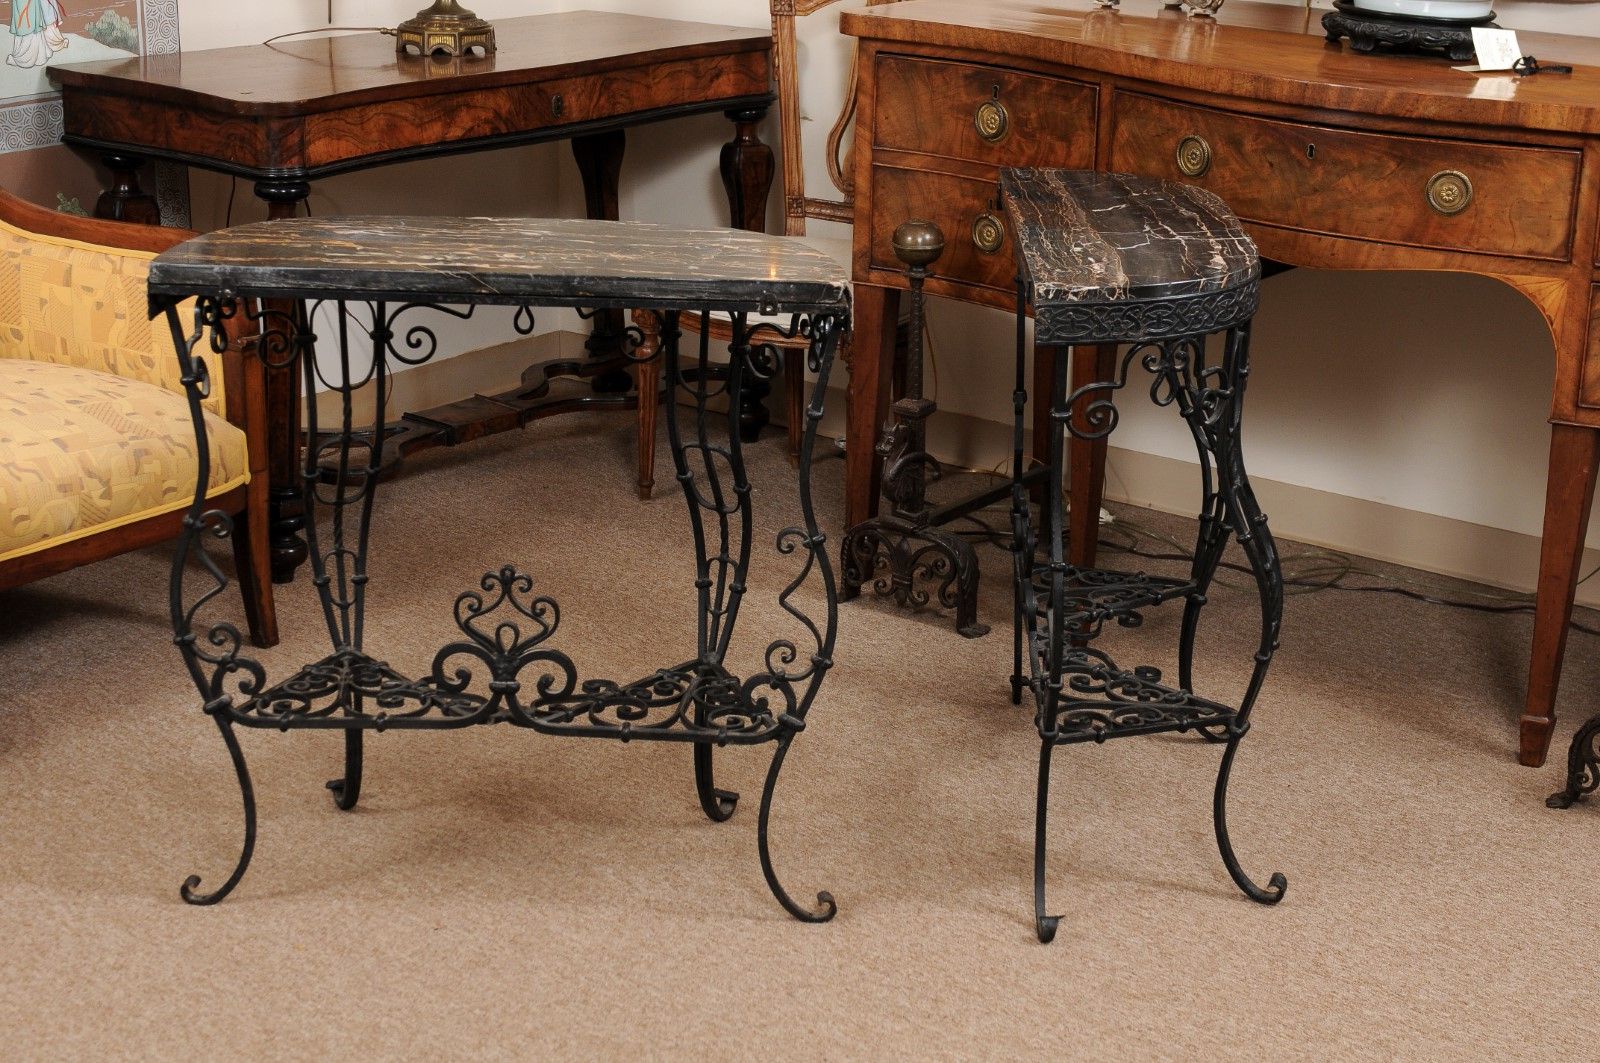 Round Iron Console Tables Throughout Most Recent Pair Of Iron Console Tables With Cabriole Legs, Scroll (View 9 of 10)